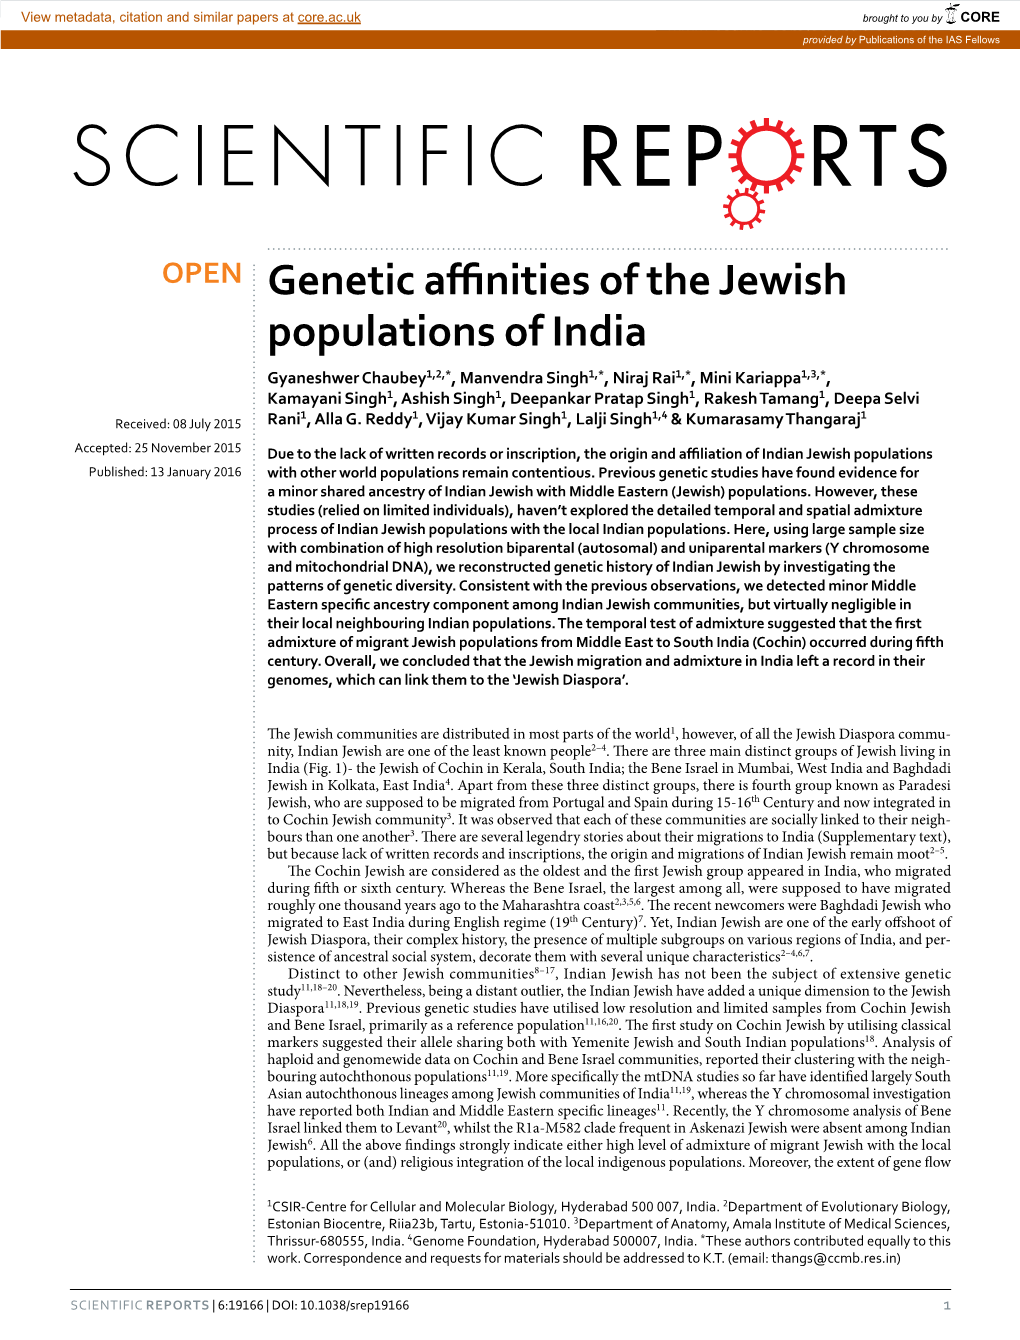 Genetic Affinities of the Jewish Populations of India